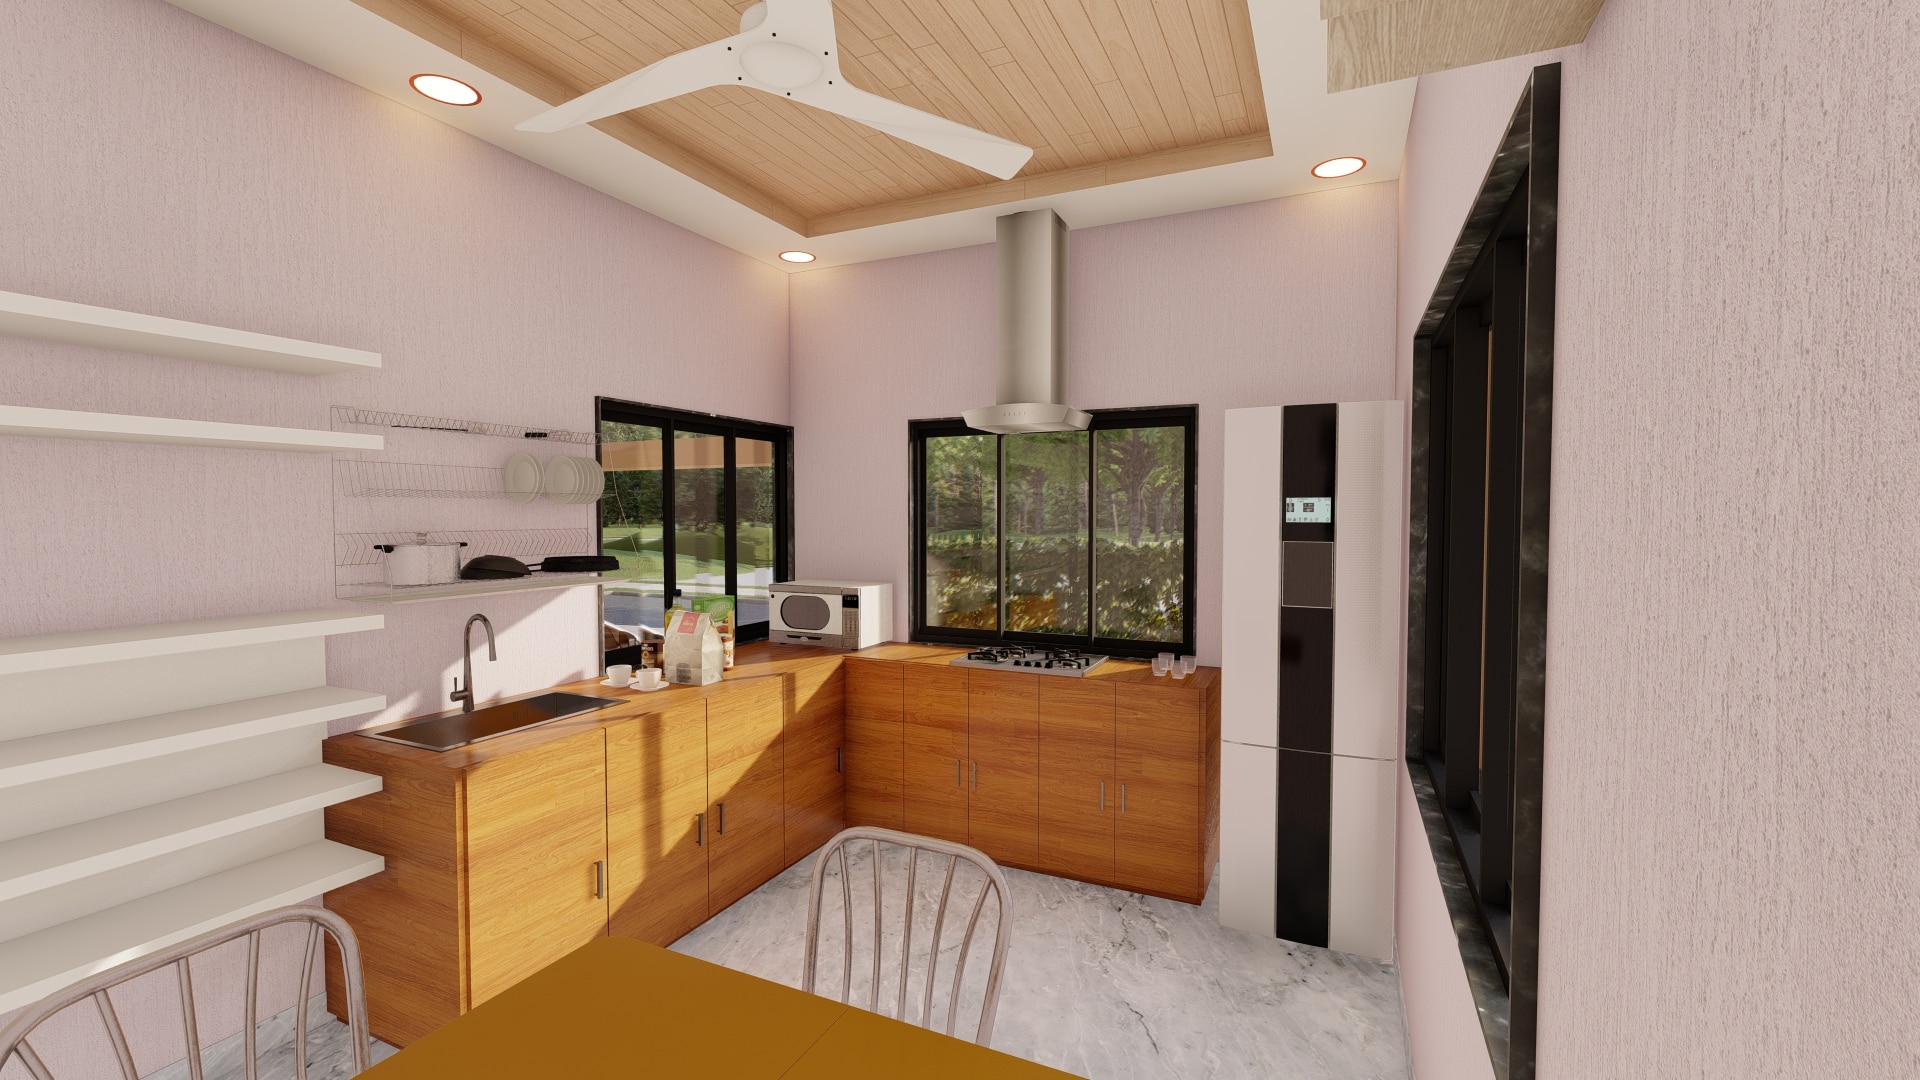 with dining area large kitchen modern bungalow house layout by urban terrace east facing 30x50 sq ft